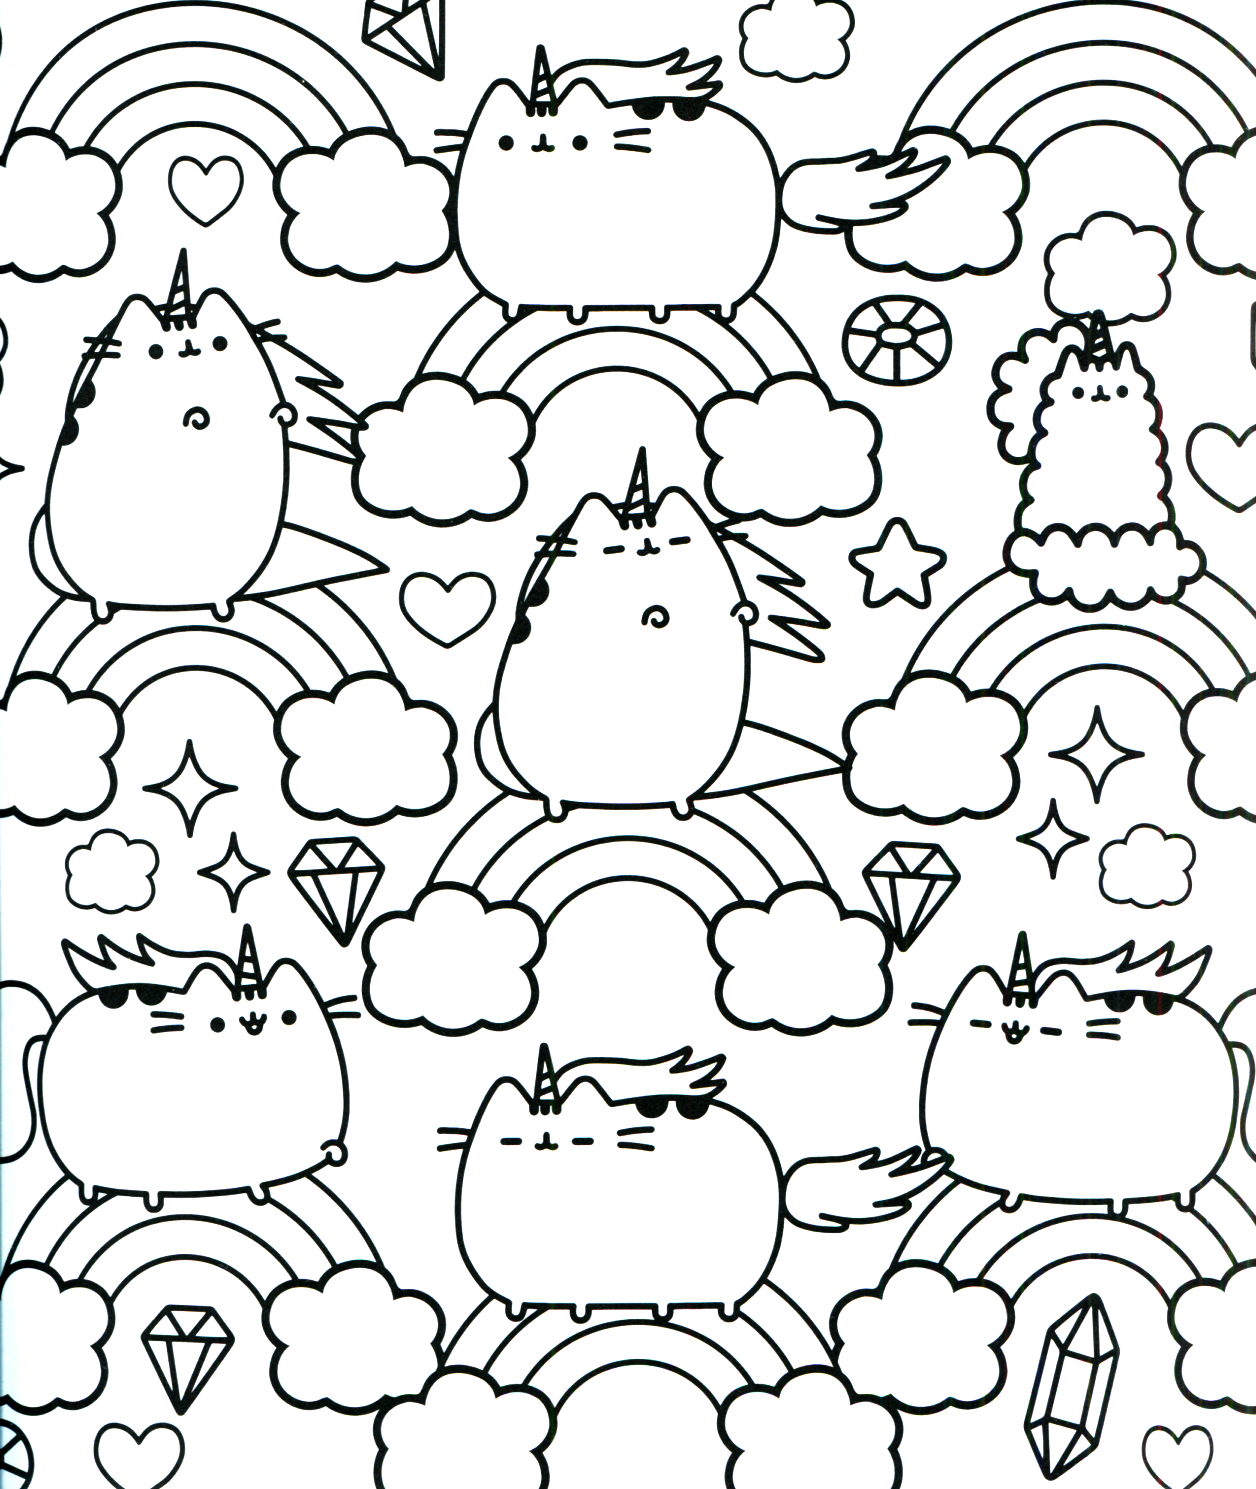 Pusheen Unicorn Cat on the rainbow Coloring Pages   Cat Coloring Pages ...